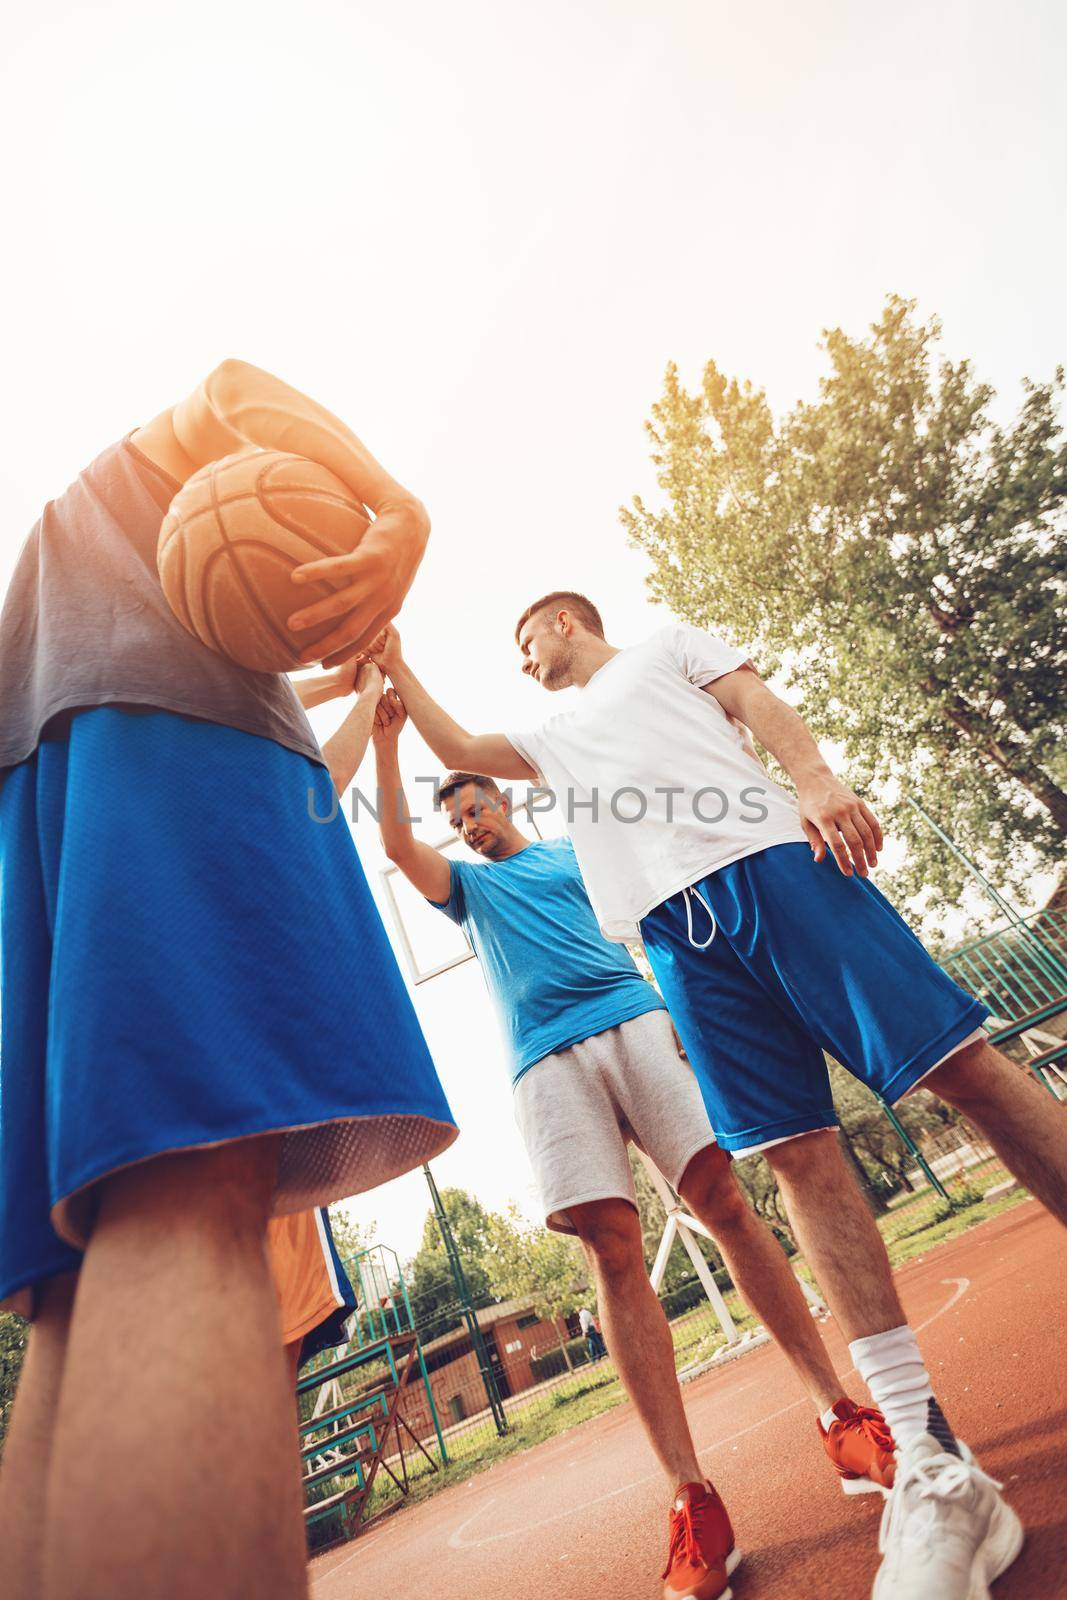 Four basketball players having a sports greeting before training. They hit their fists.